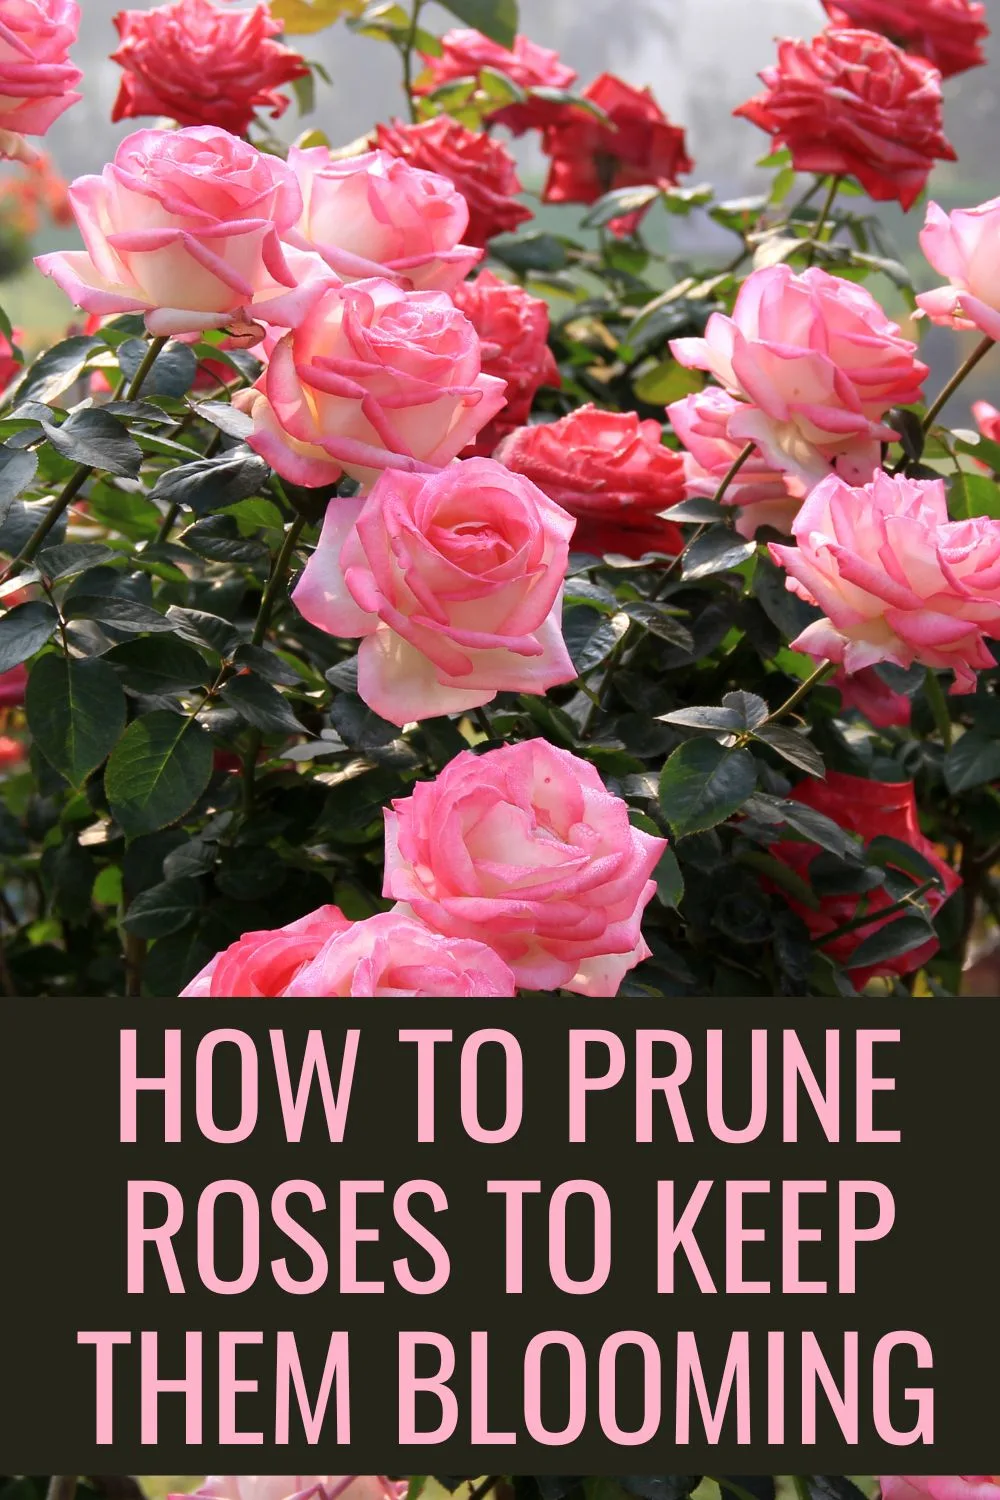 How to prune roses to keep them blooming